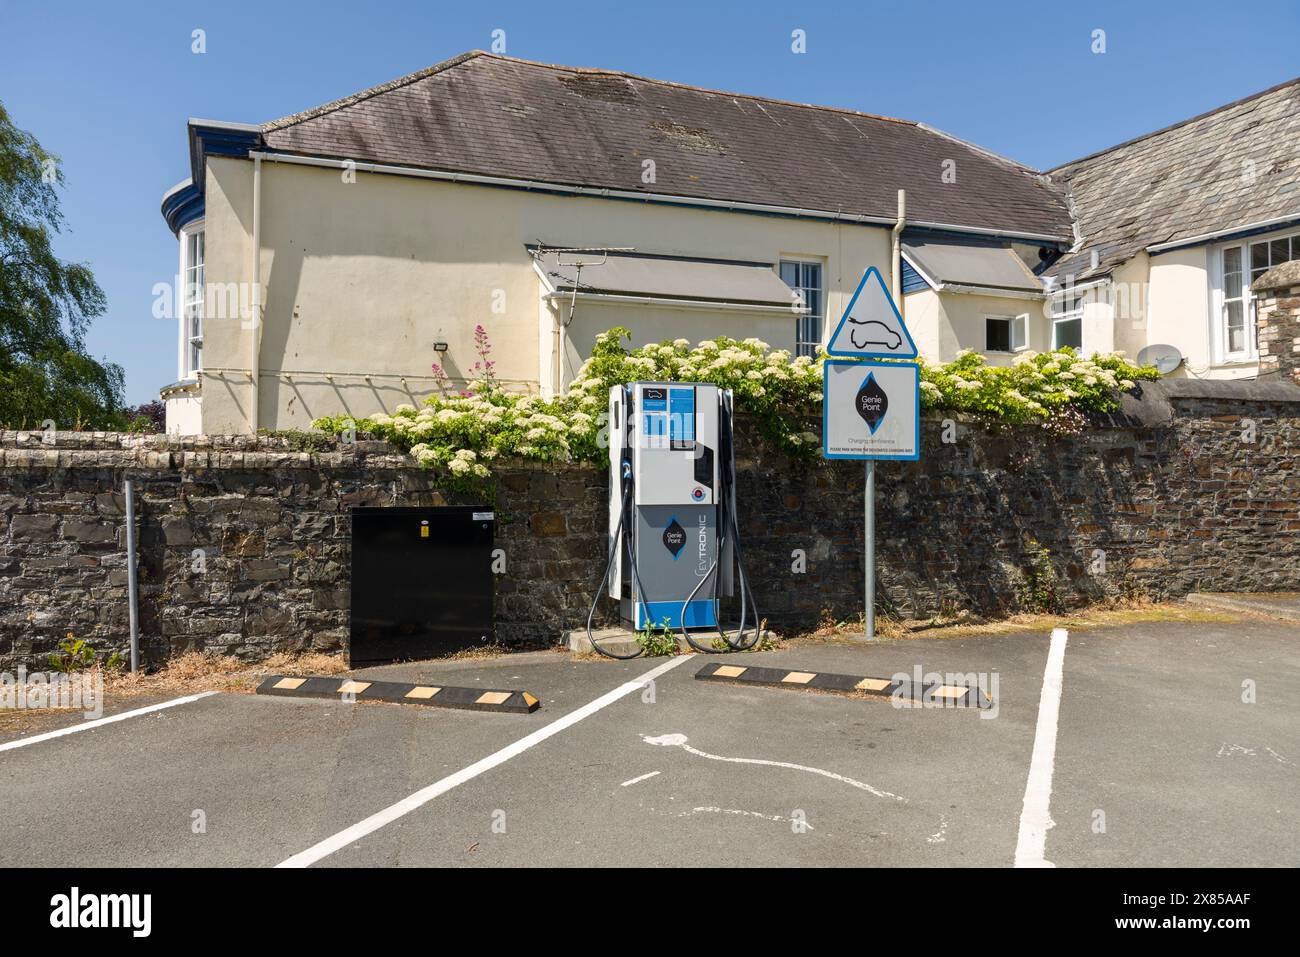 A Genie Point electric vehicle rapid charger in a car park in the market town of Great Torrington, Devon, England. Stock Photo